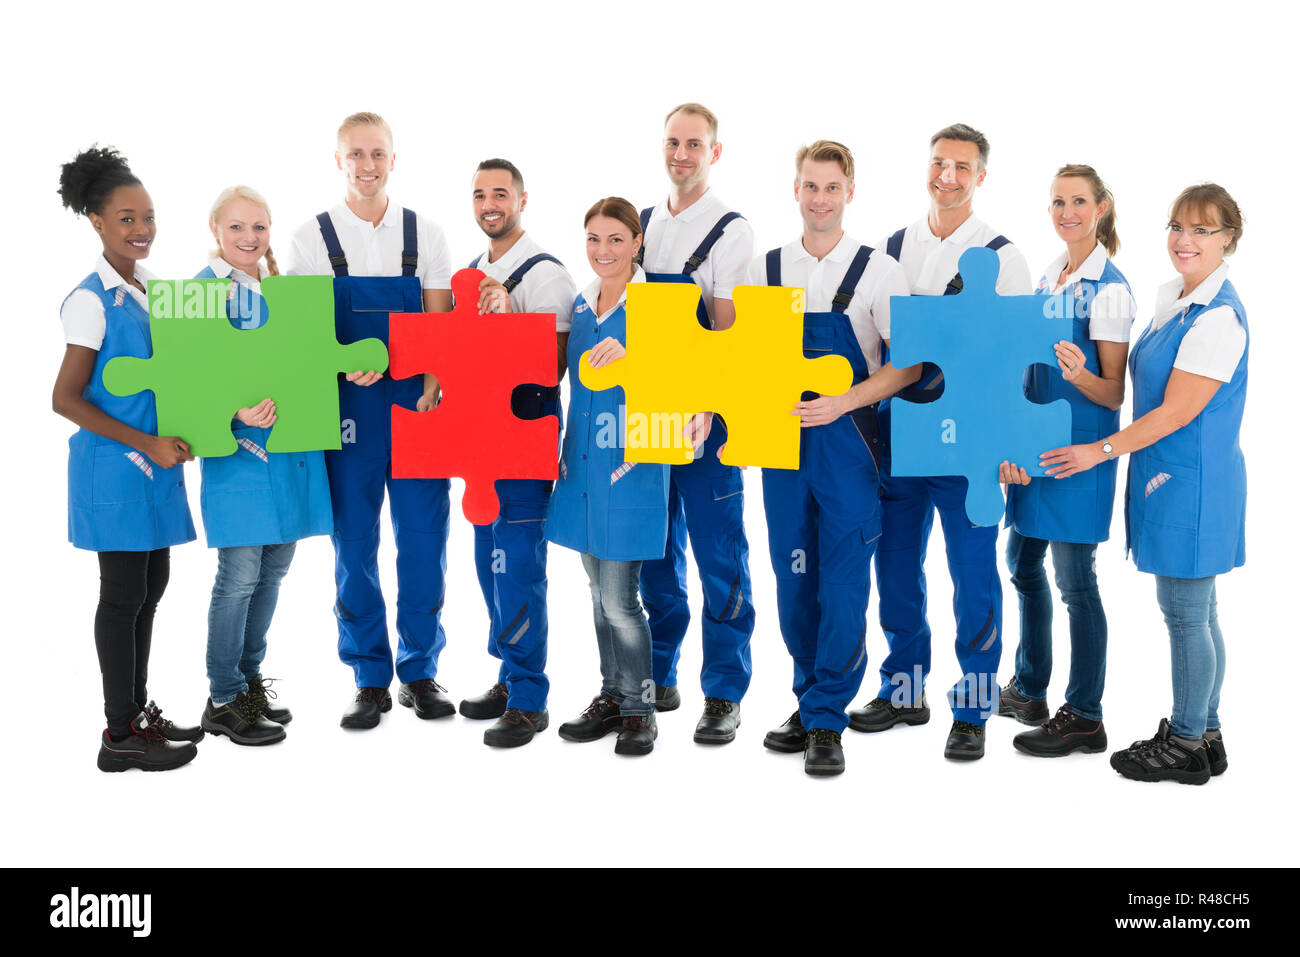 Confident Janitors Holding Jigsaw Pieces In Row Stock Photo